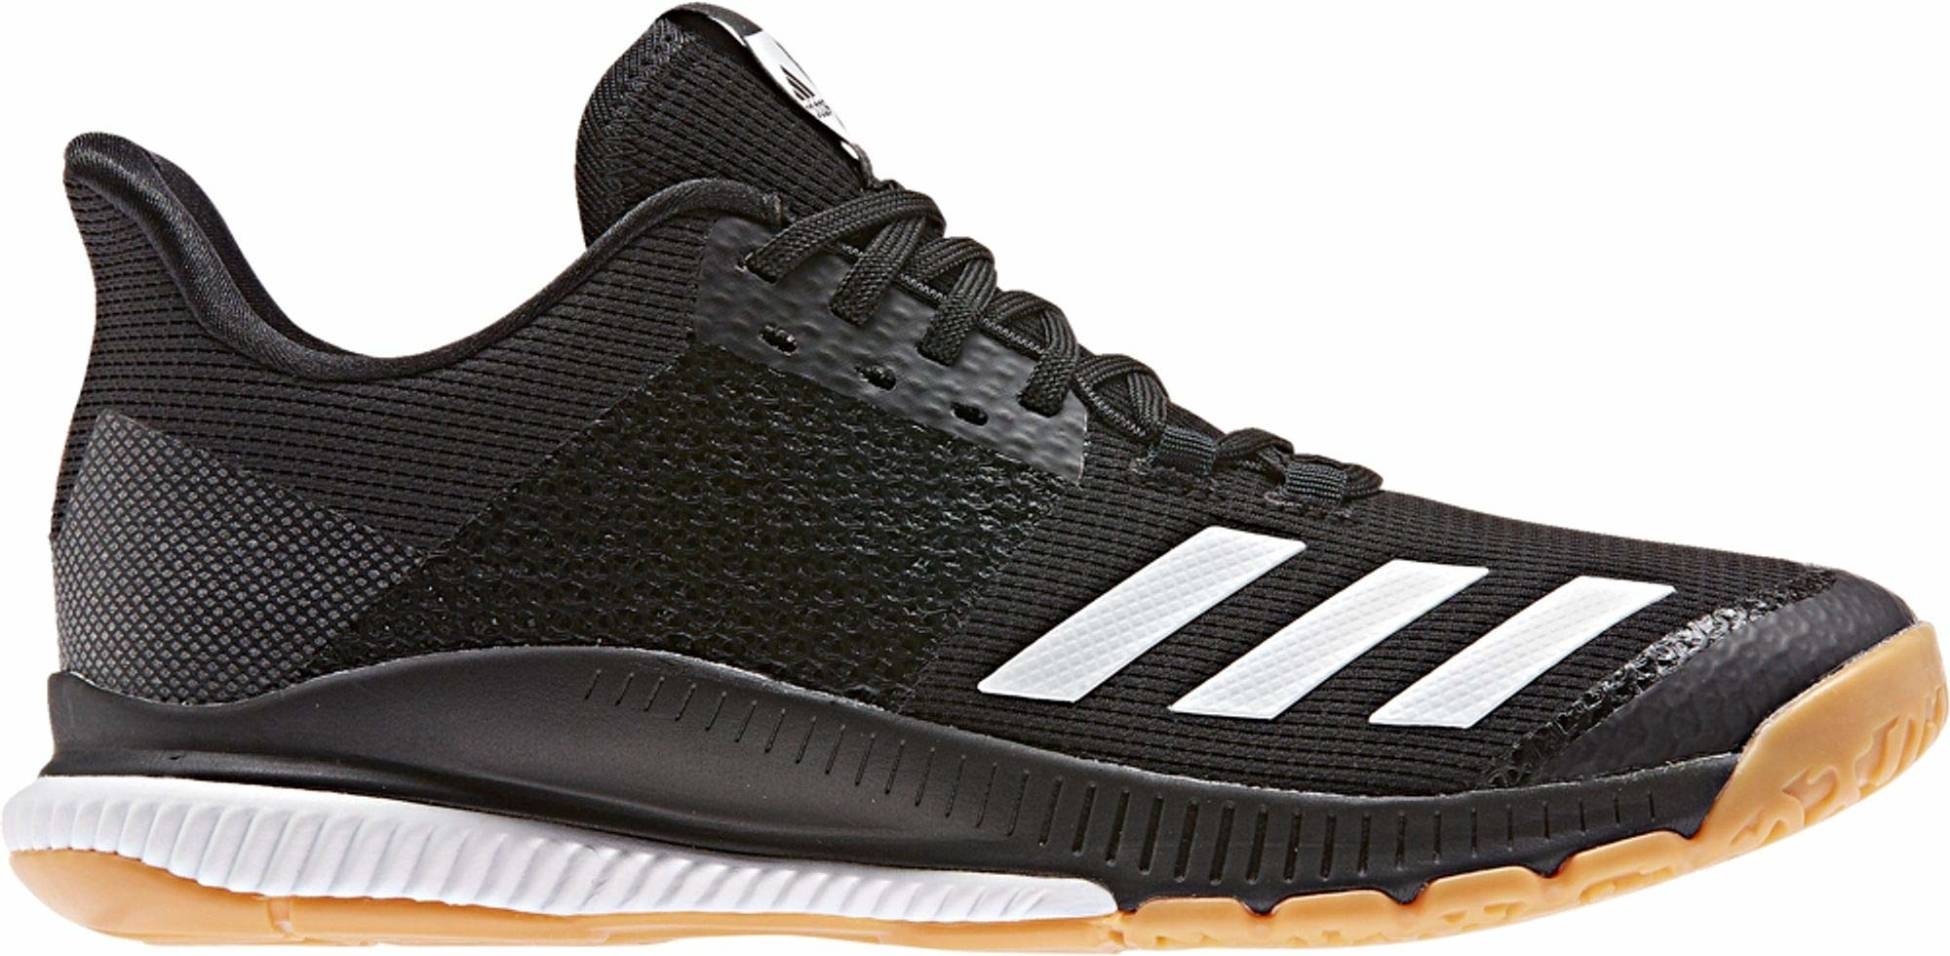 adidas crazyflight bounce volleyball shoes